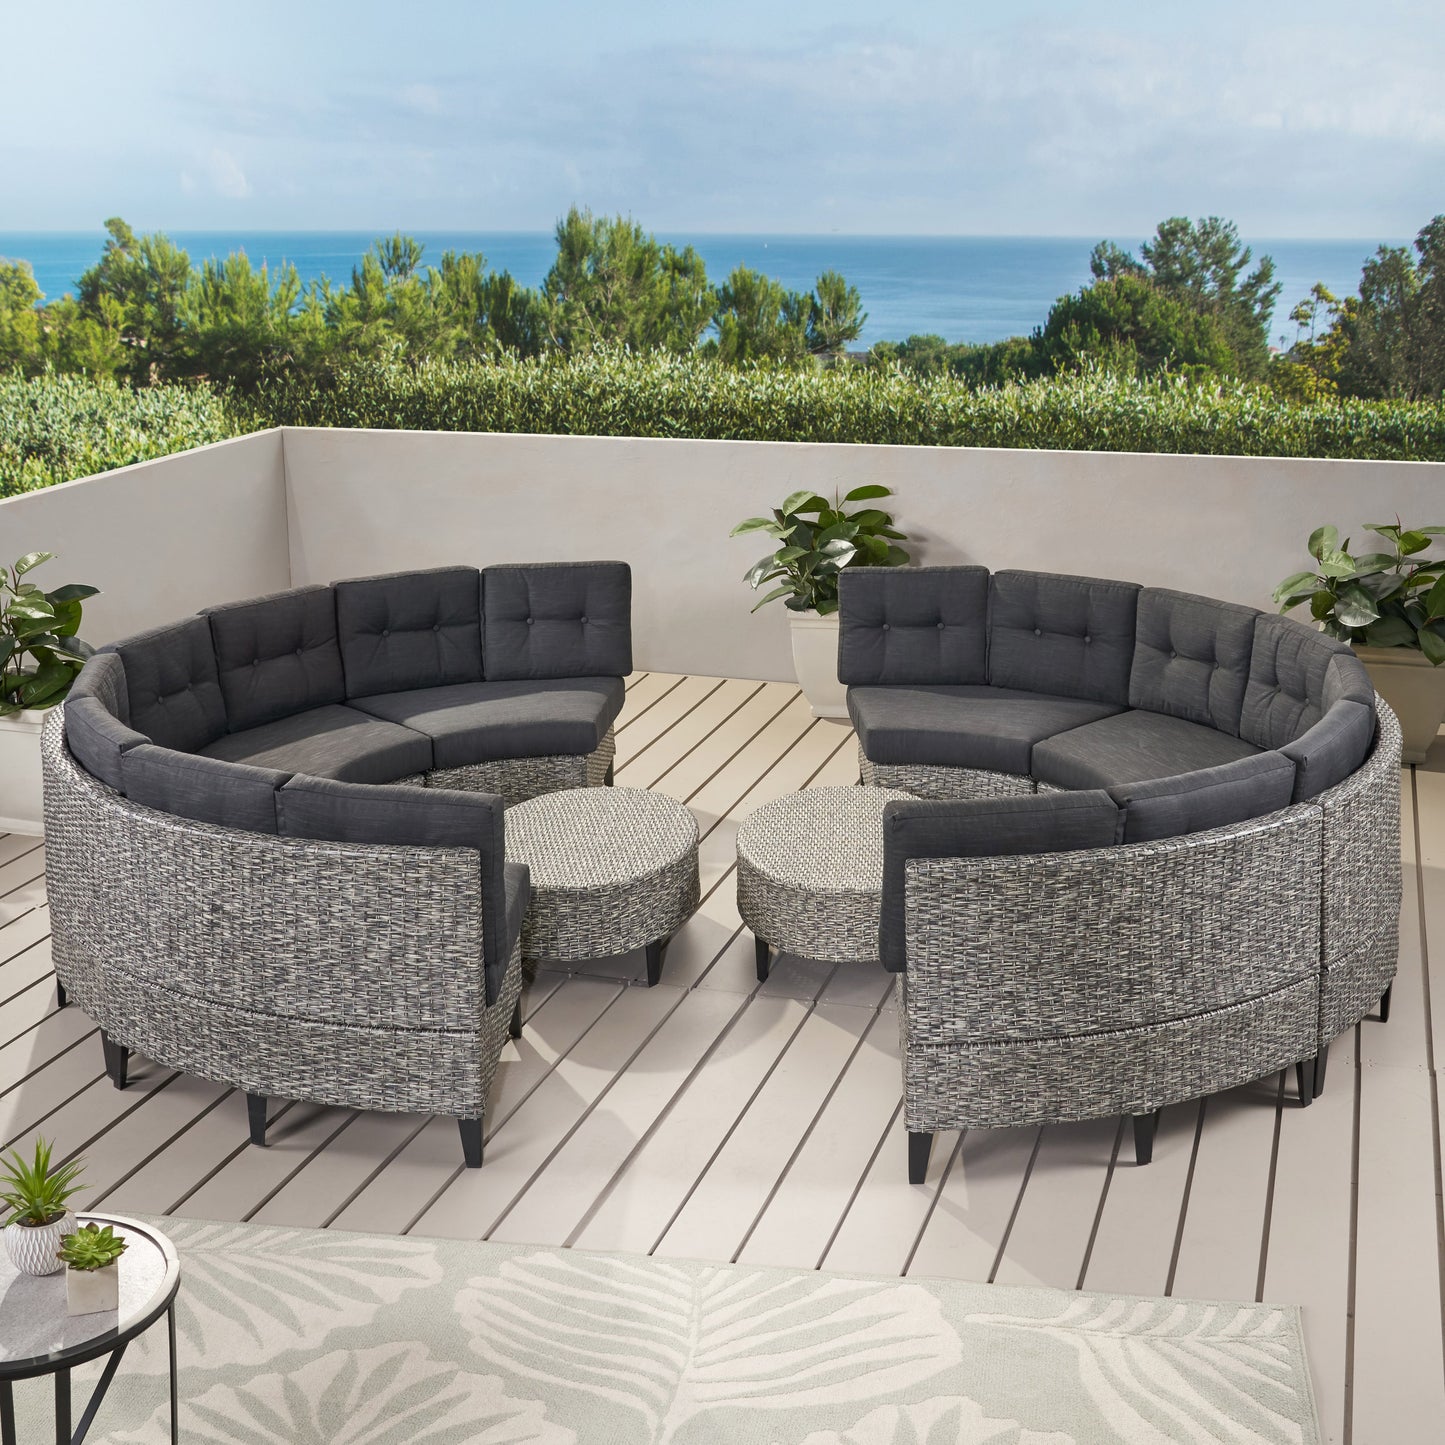 Currituck Outdoor 10 Piece Mixed Black Wicker Sofa Set with Dark Grey Water Resistant Fabric Cushions